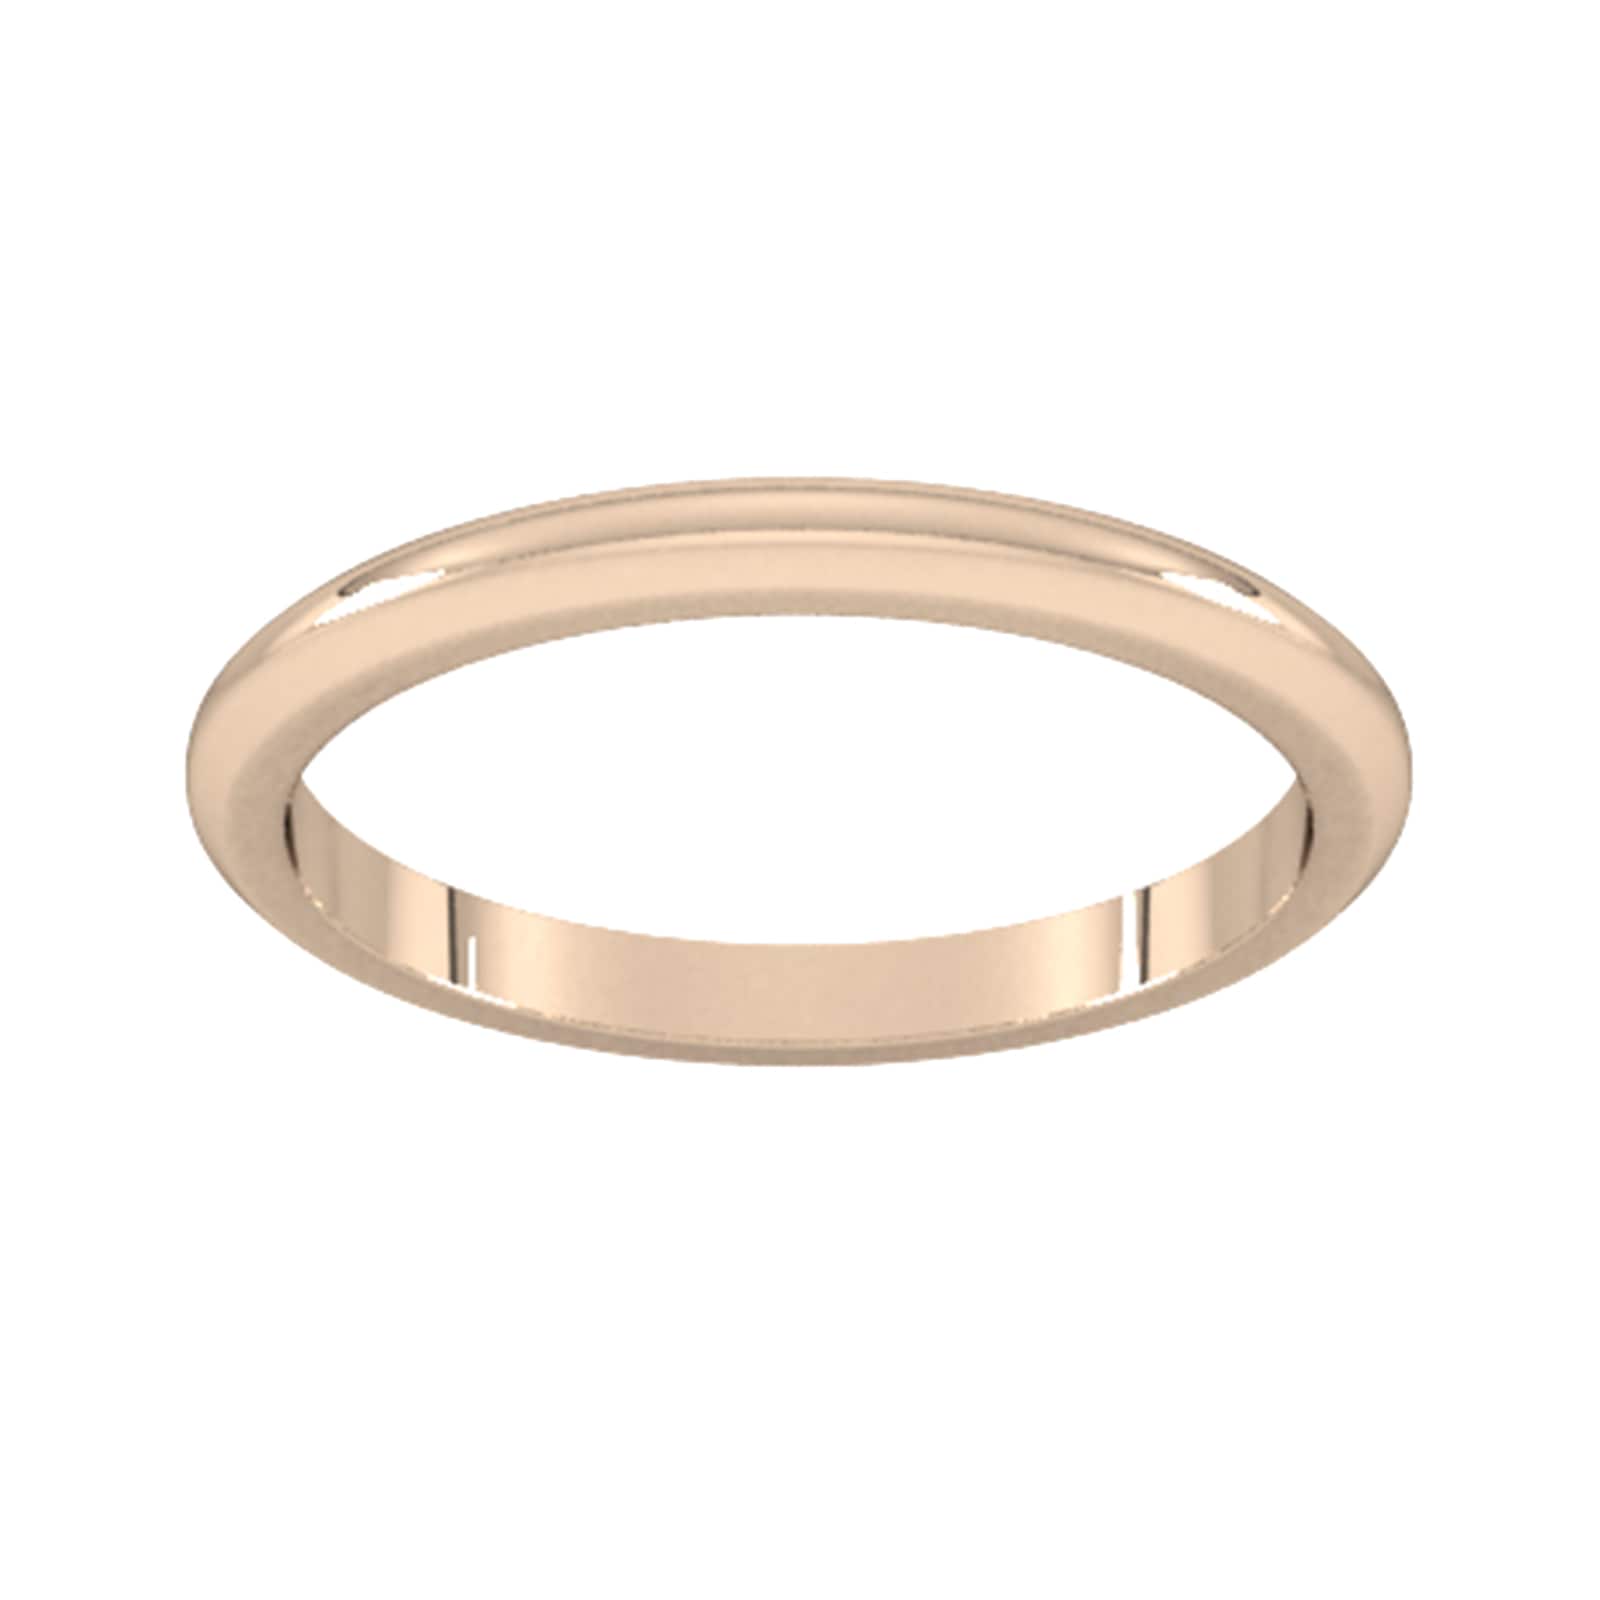 2mm D Shape Heavy Wedding Ring In 9 Carat Rose Gold - Ring Size O